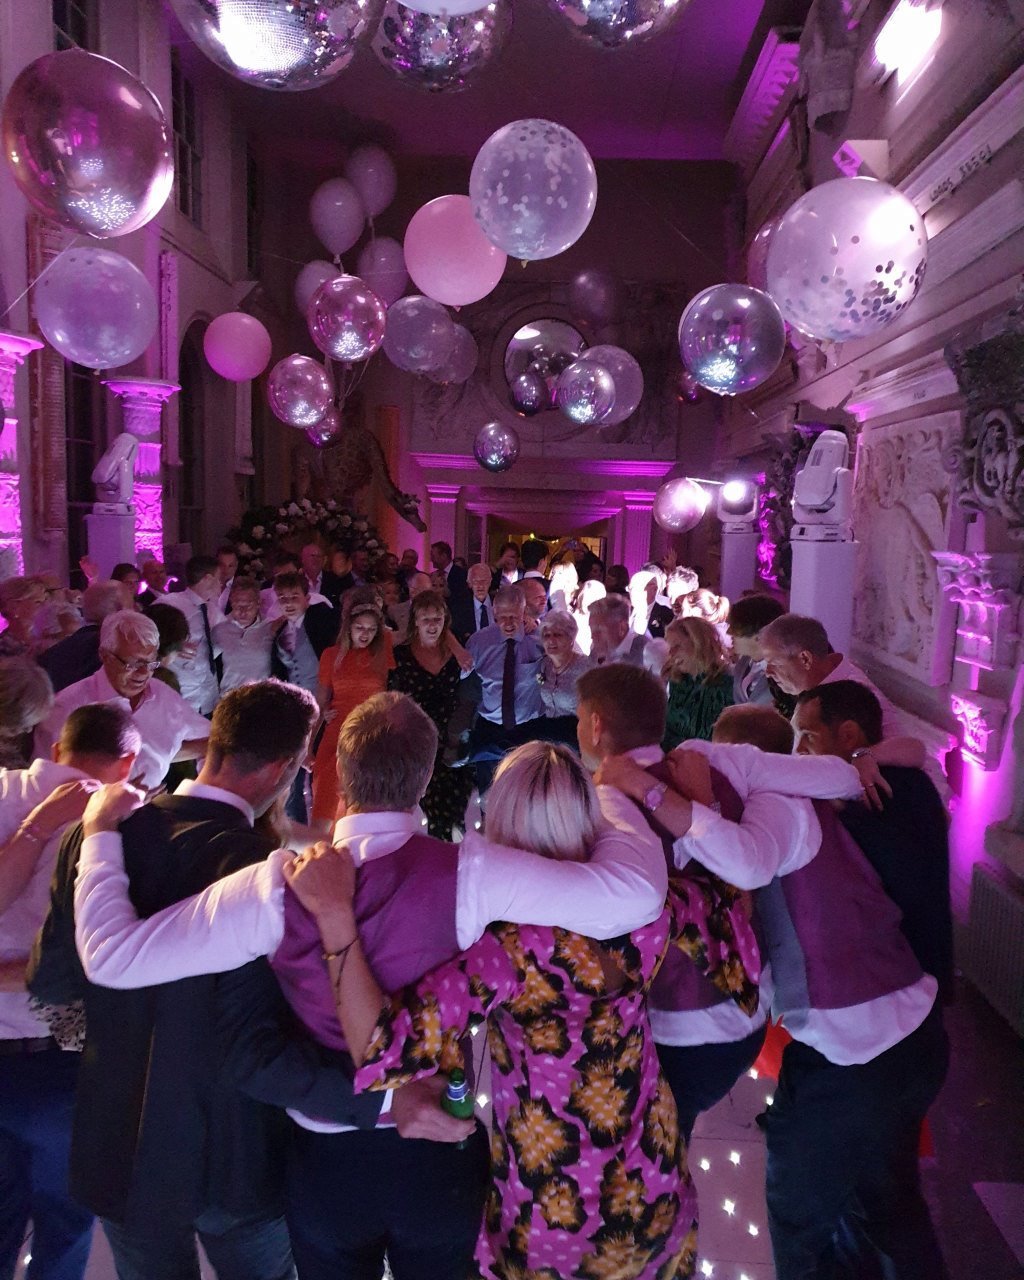 Aynhoe Park wedding guest come together at the end of the wedding disco to celebrate the couple